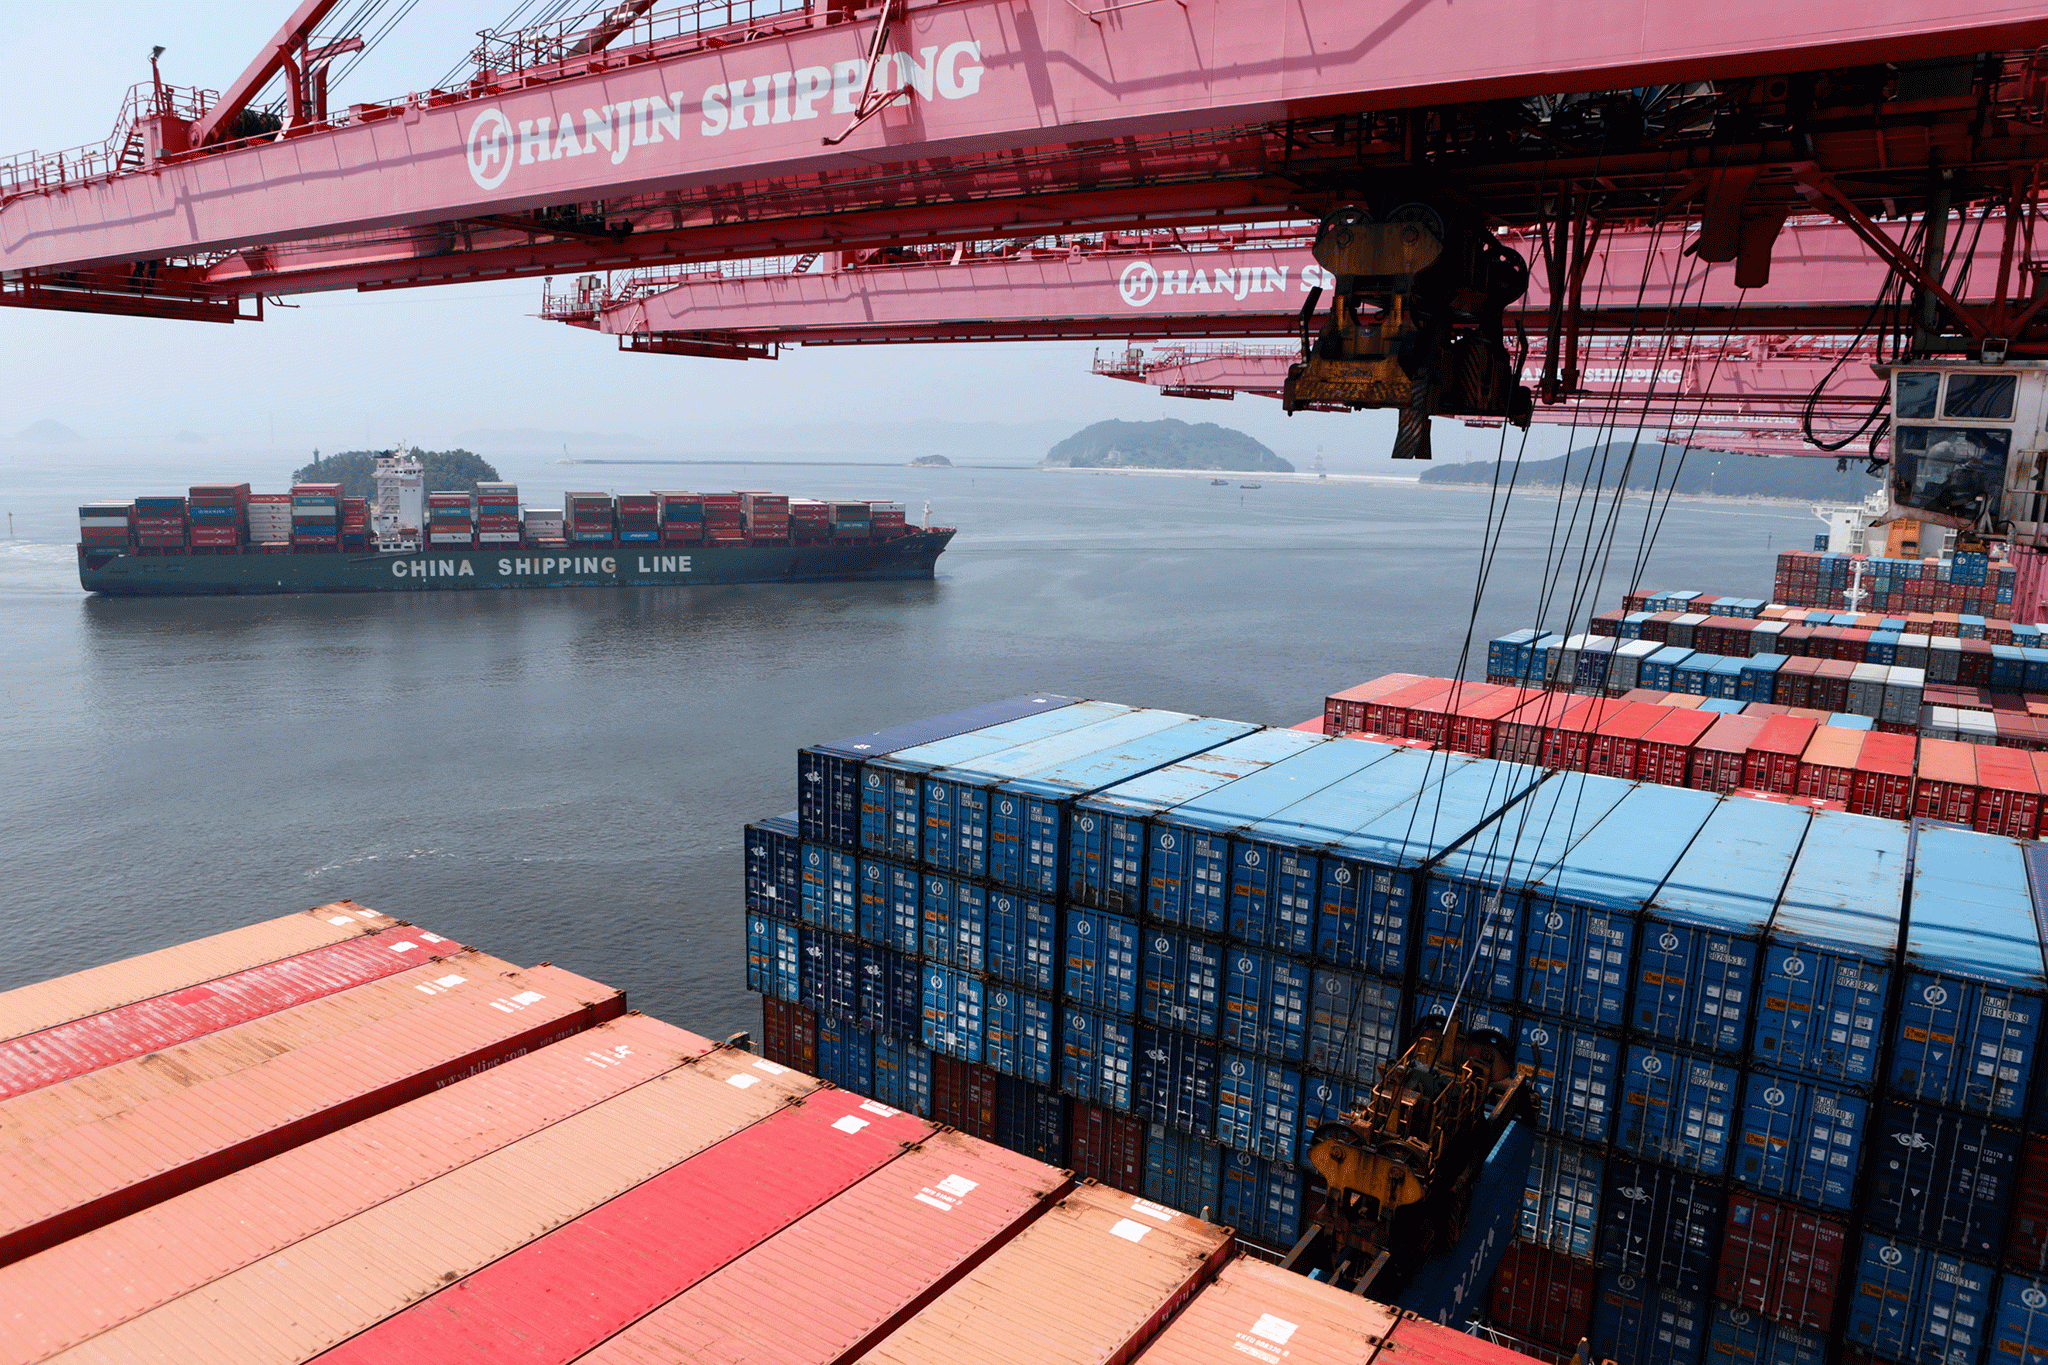 Half a million 40 foot shipping containers are affected – with no sign of a quick resolution